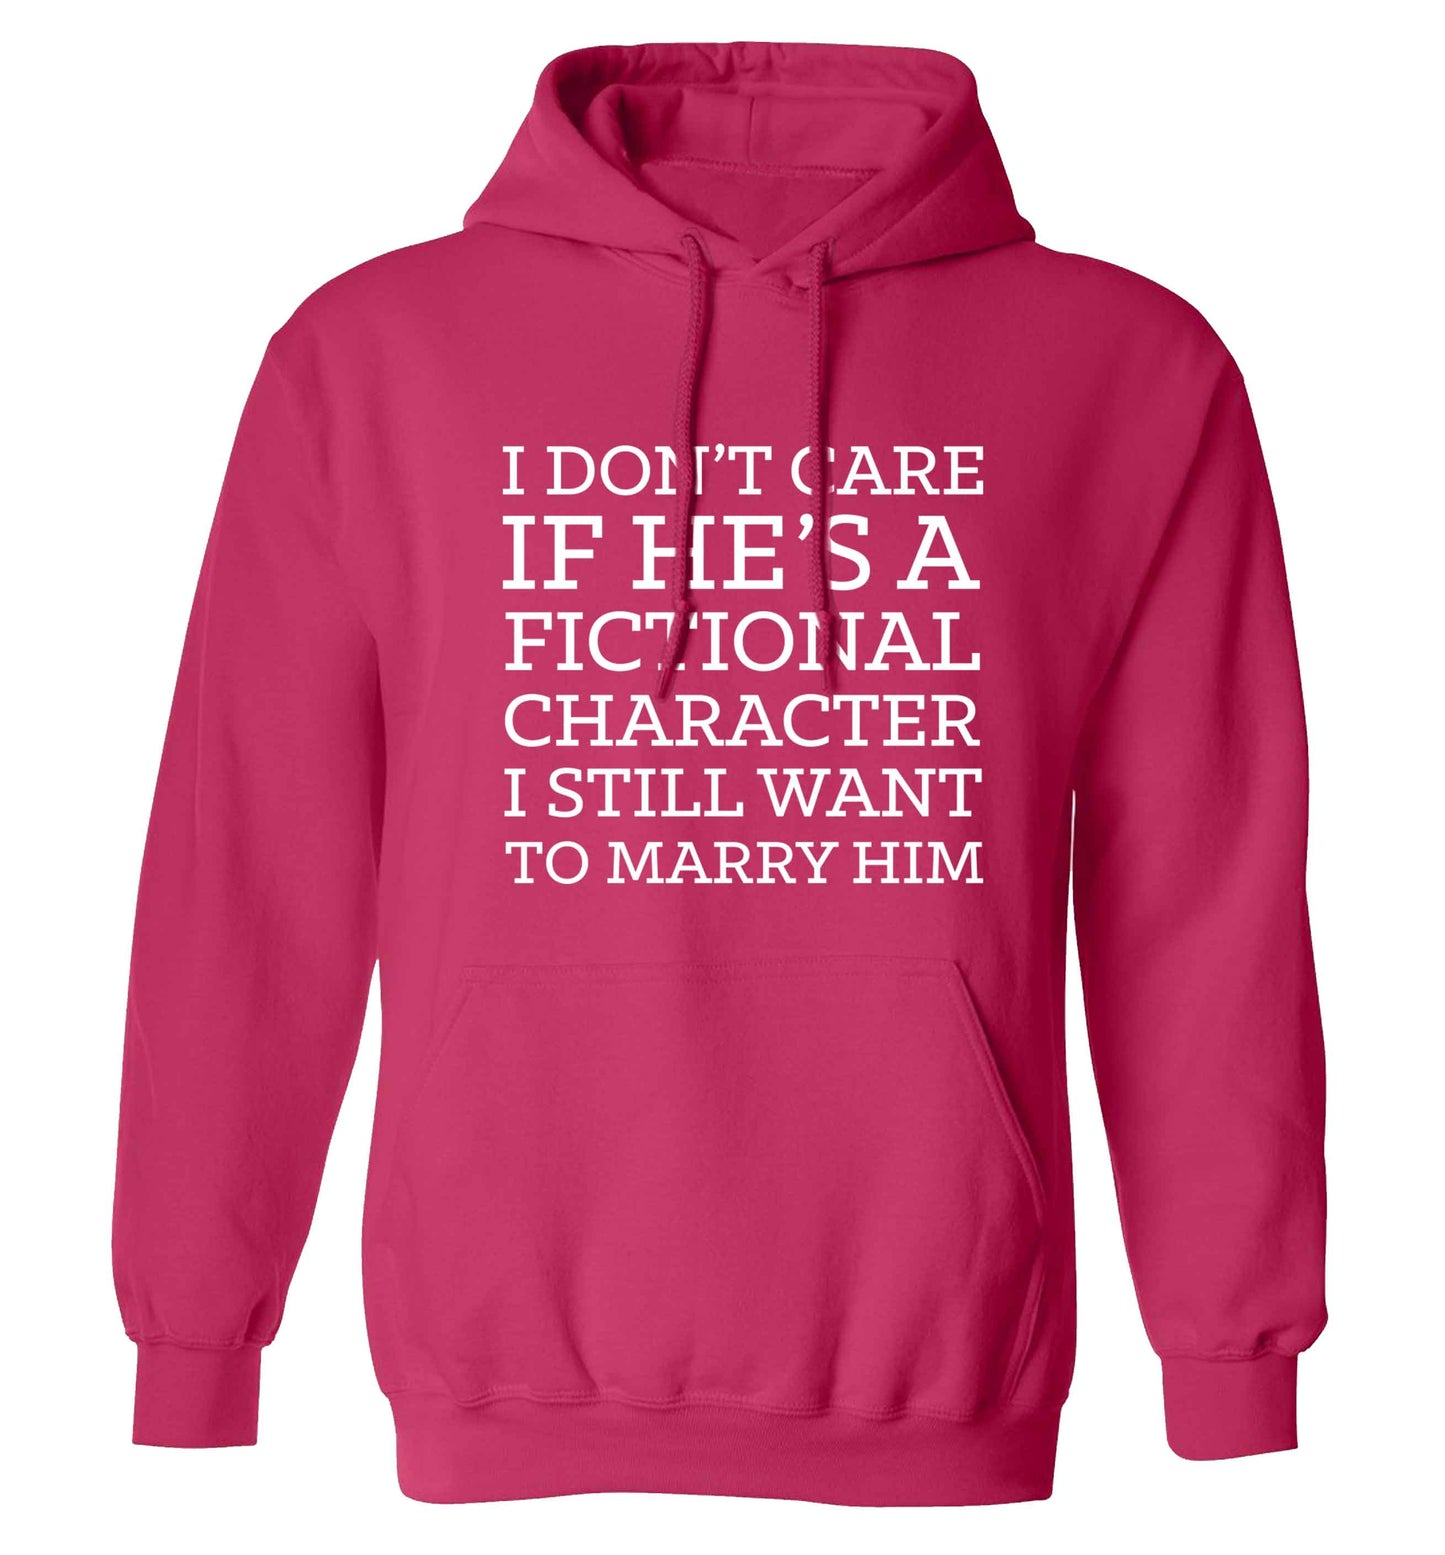 I don't care if he's a fictional character I still want to marry him adults unisex pink hoodie 2XL